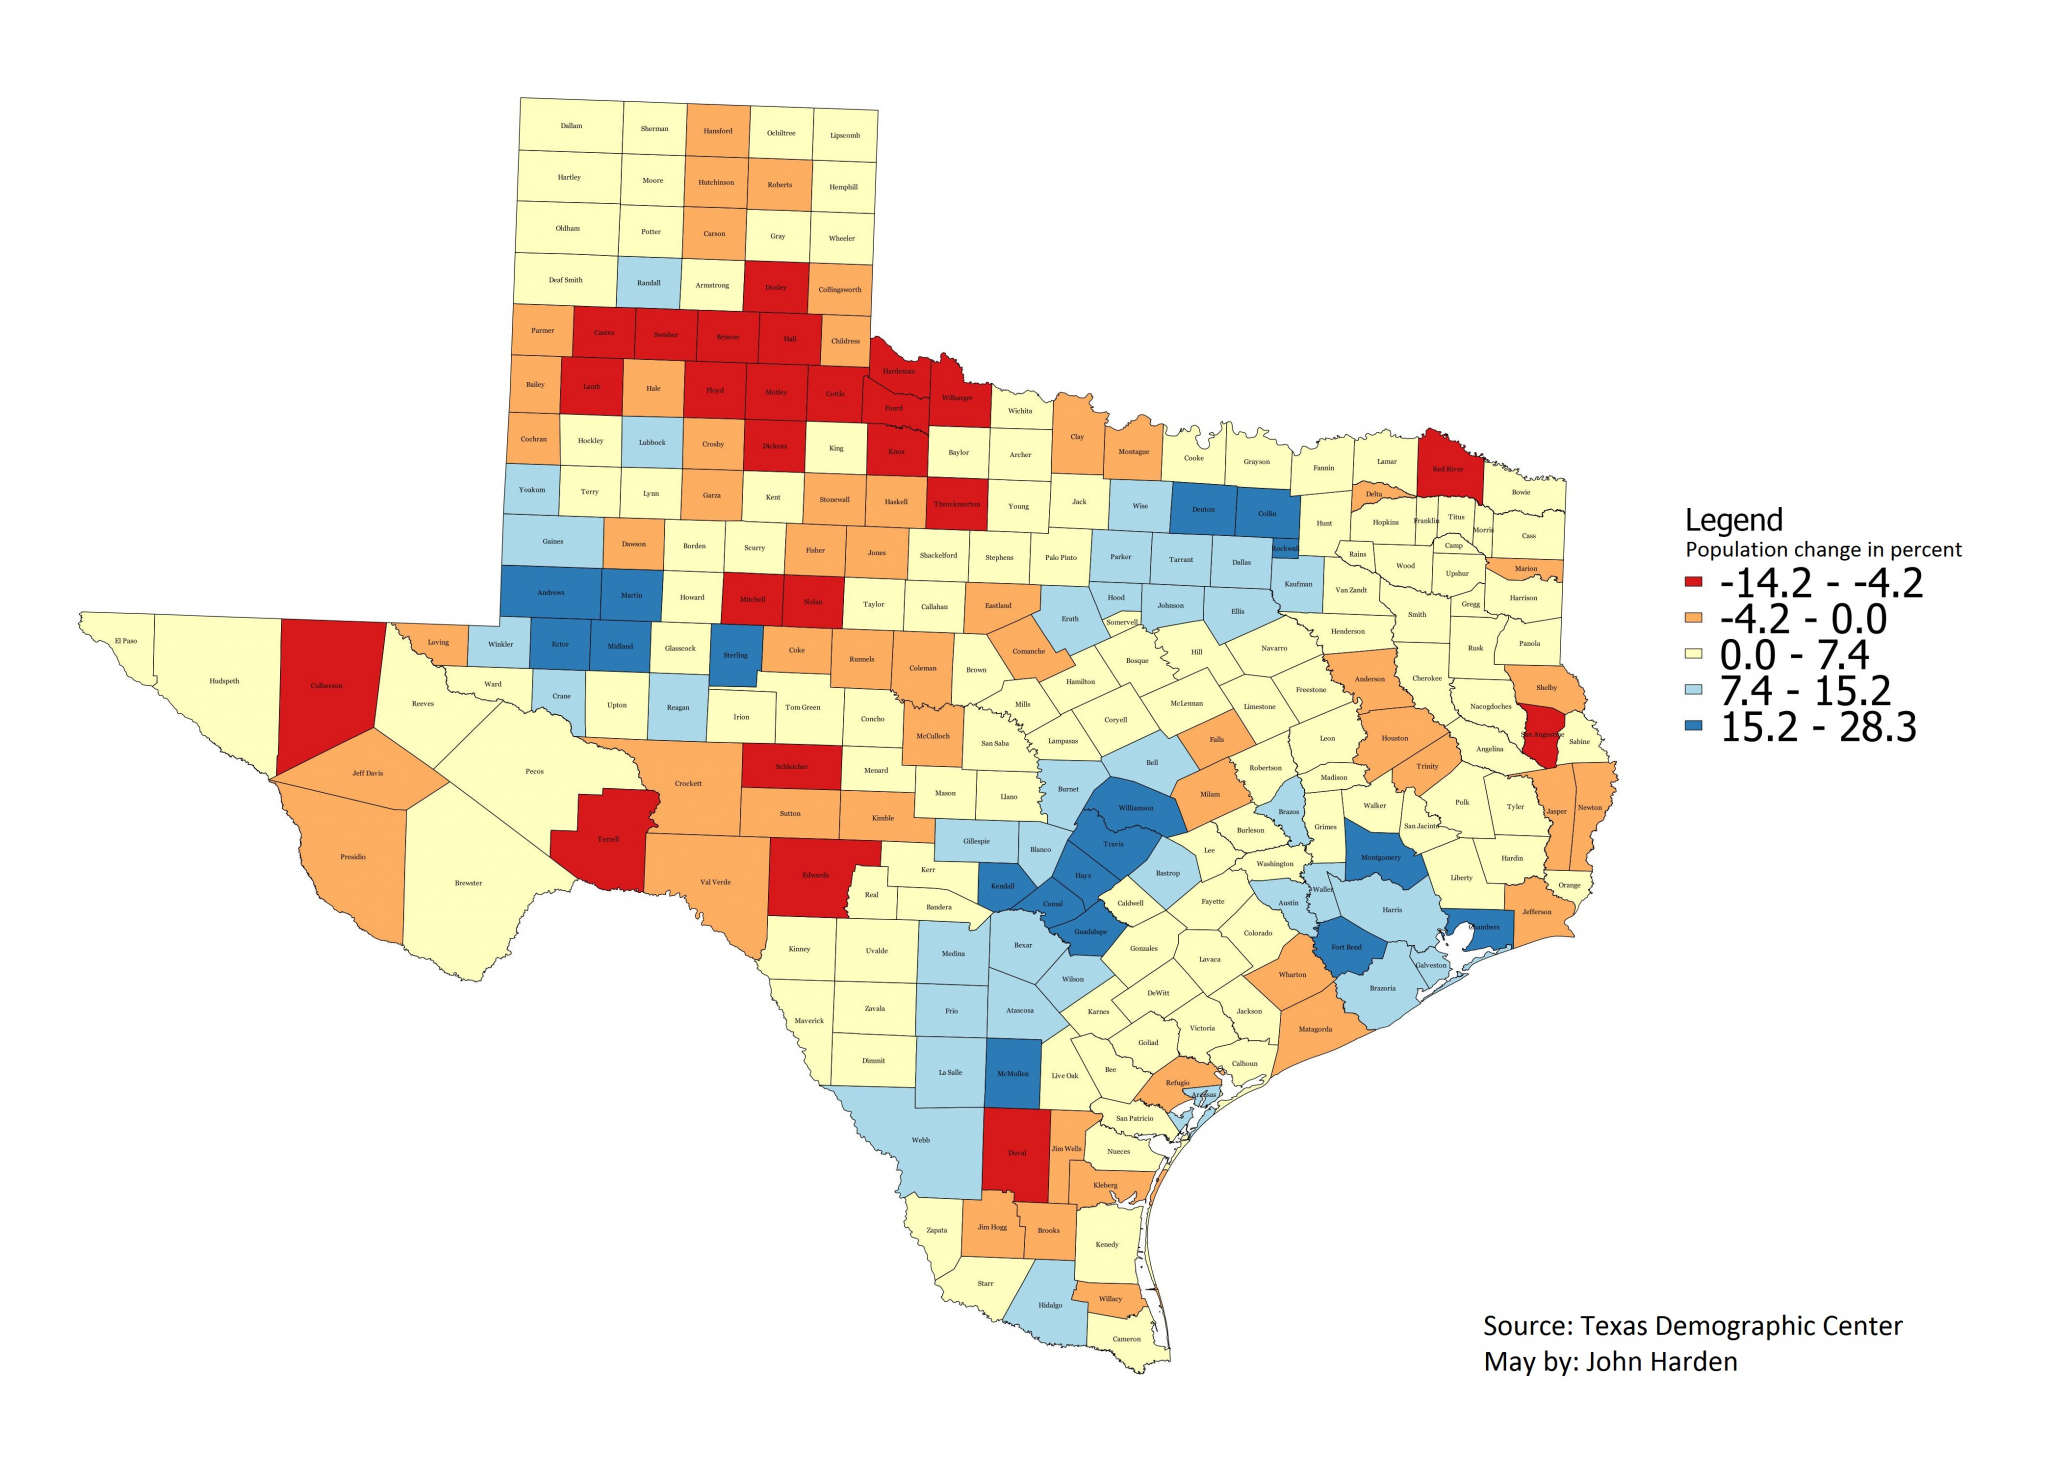 New 2016 Texas county population estimates show continued urban rise.